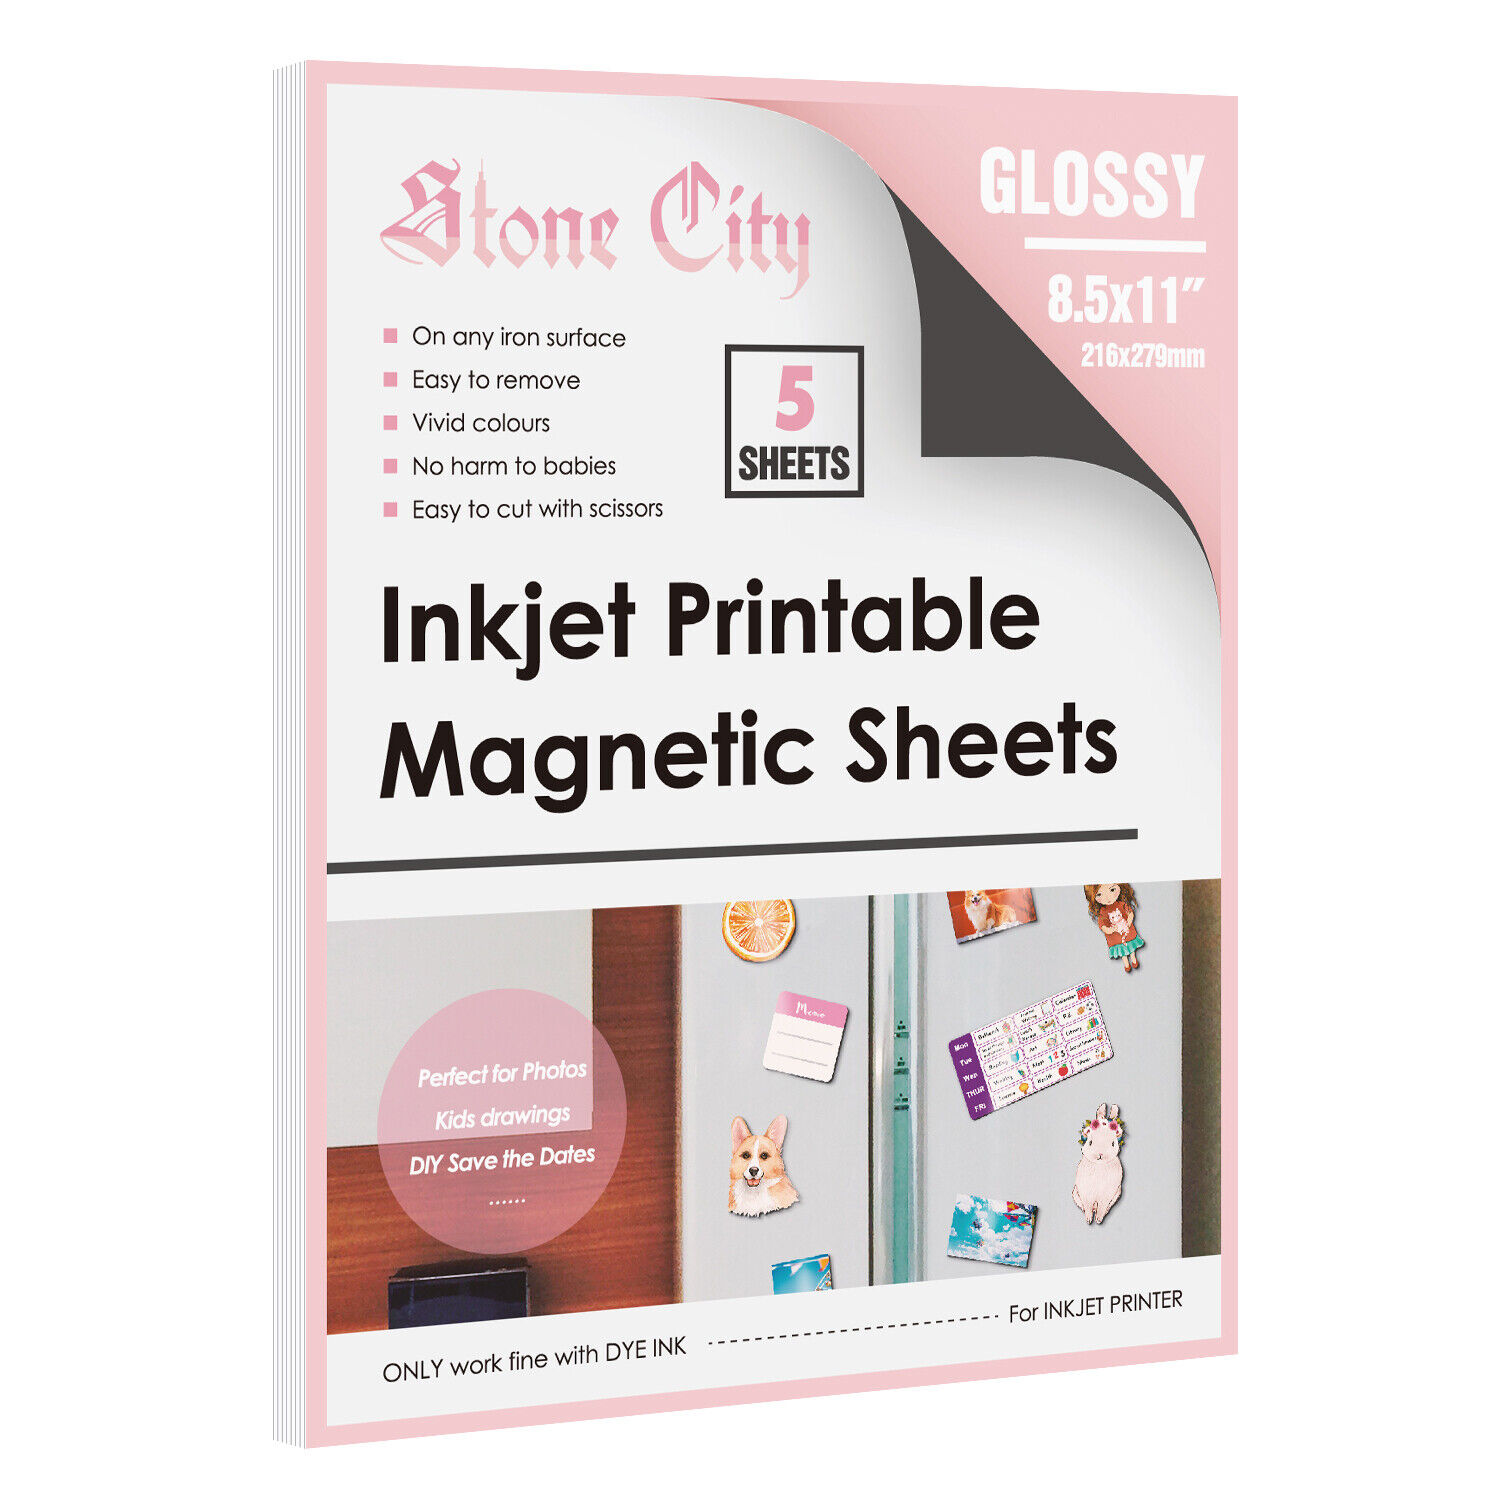 Printable Magnetic Sheets Glossy White Magnet Photo Paper 8.5x11 Inkjet Cutable